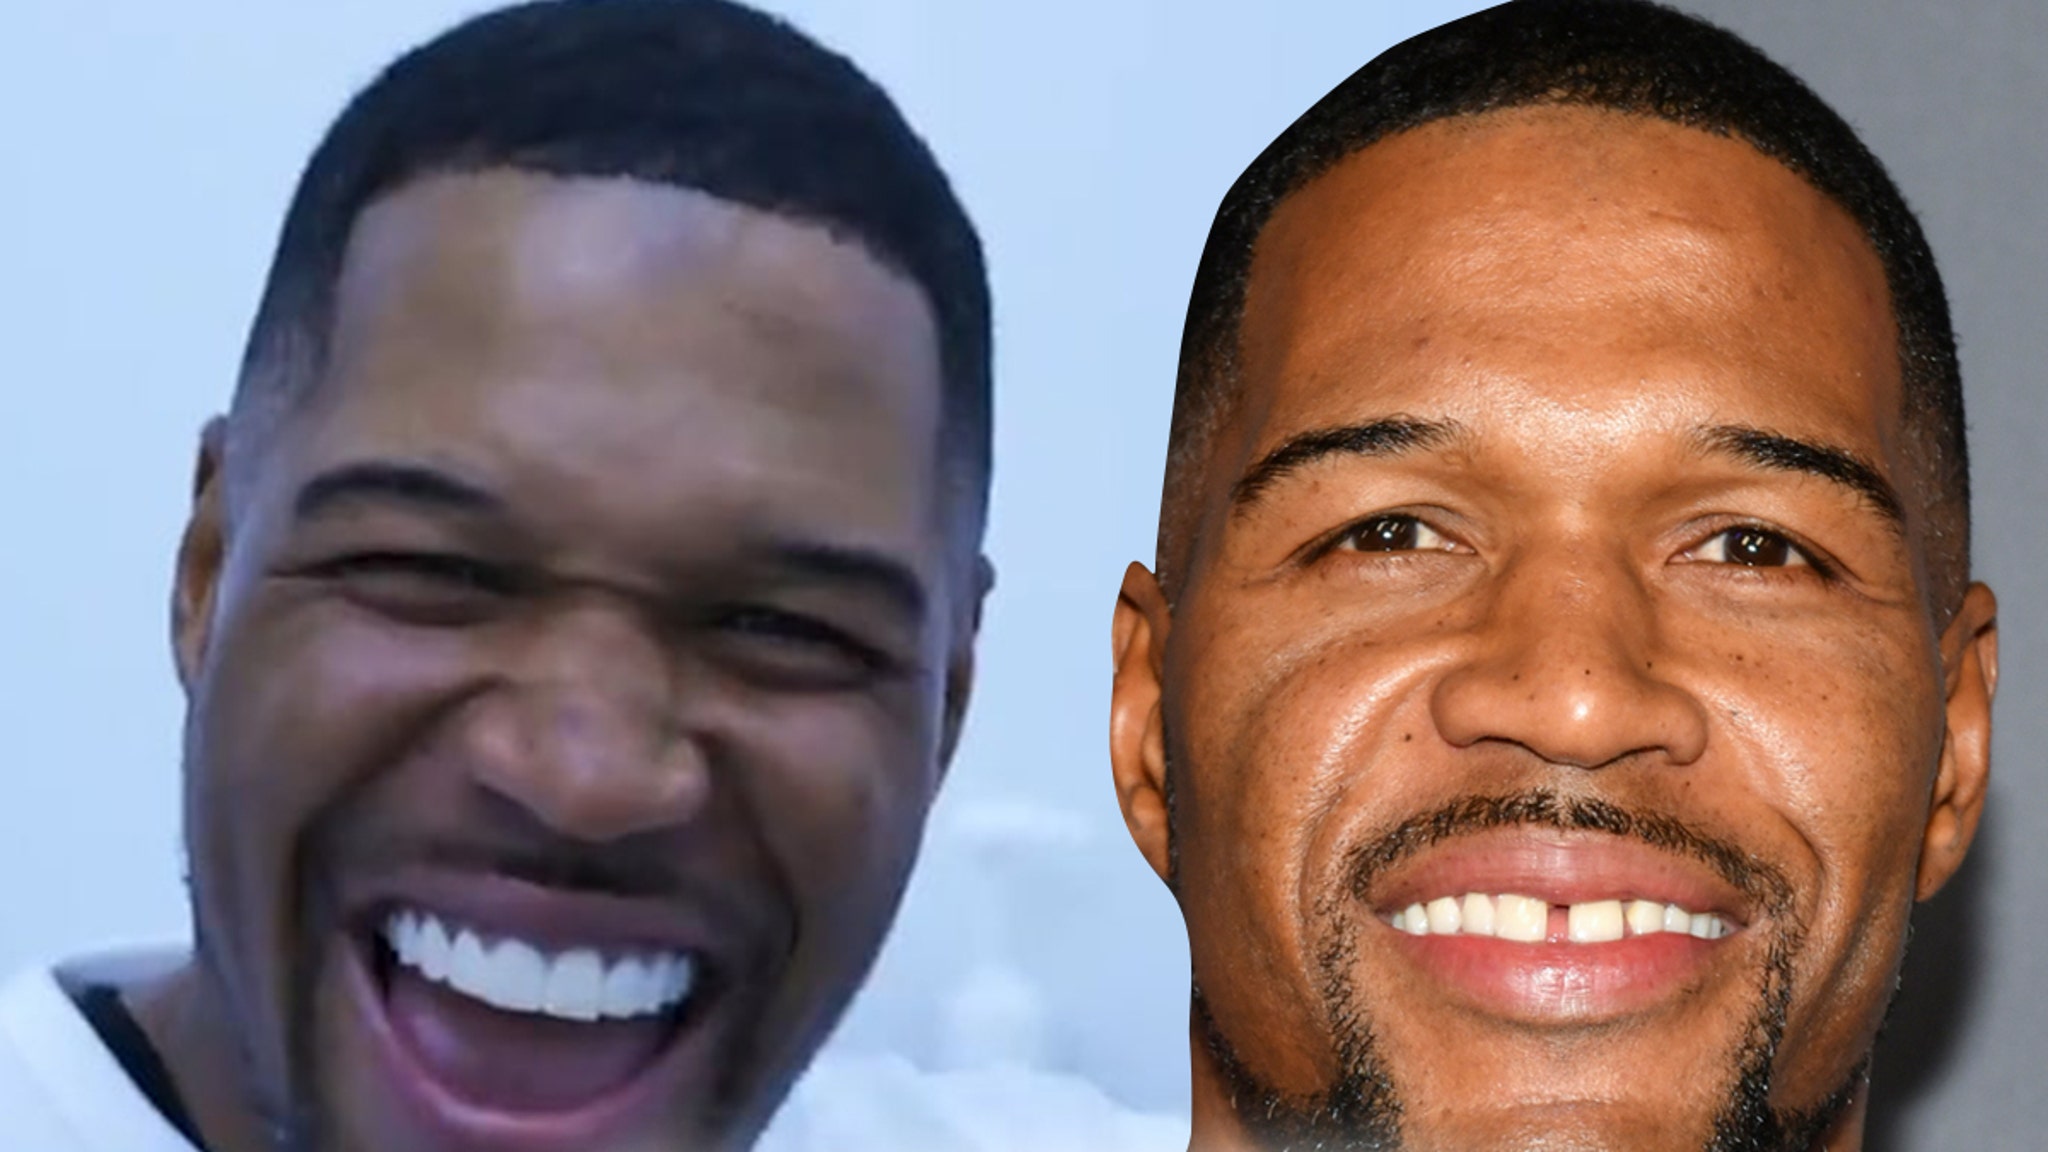 Michael Strahan is conducting a huge deal for the dentist who “fixed” the dental gap